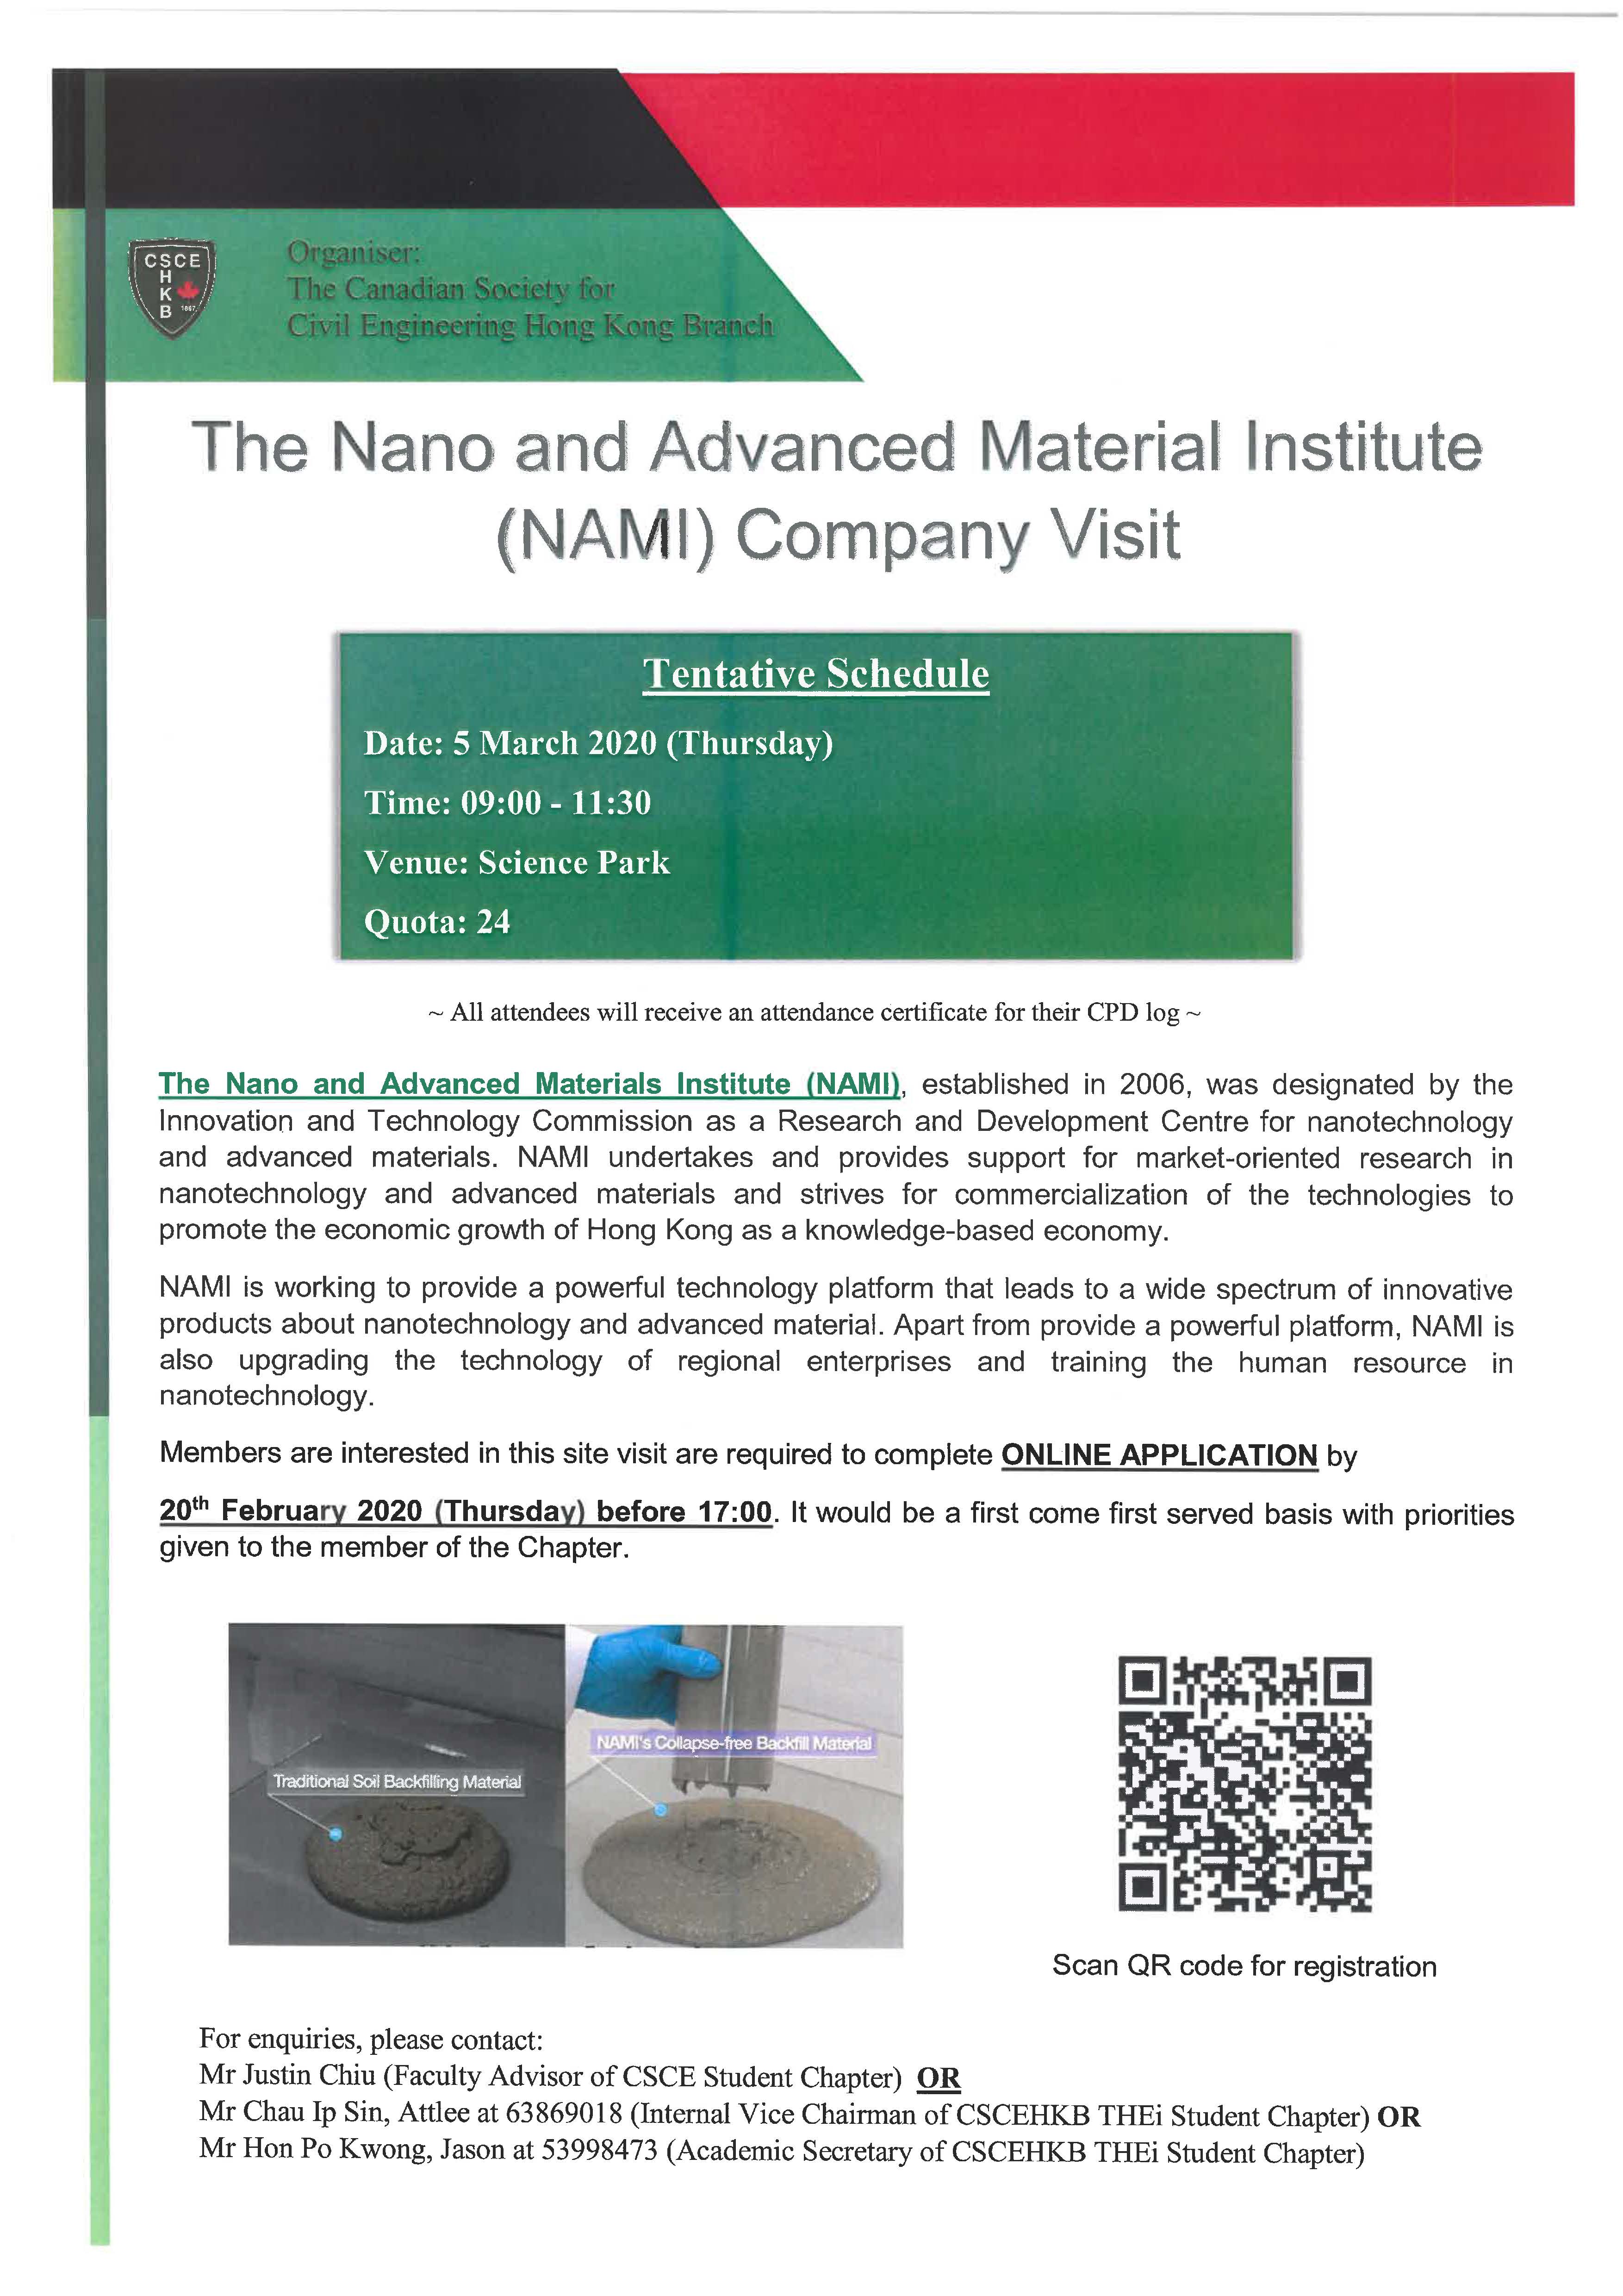 The Nano and Advanced Material Insitute (NAMI) Company Visit